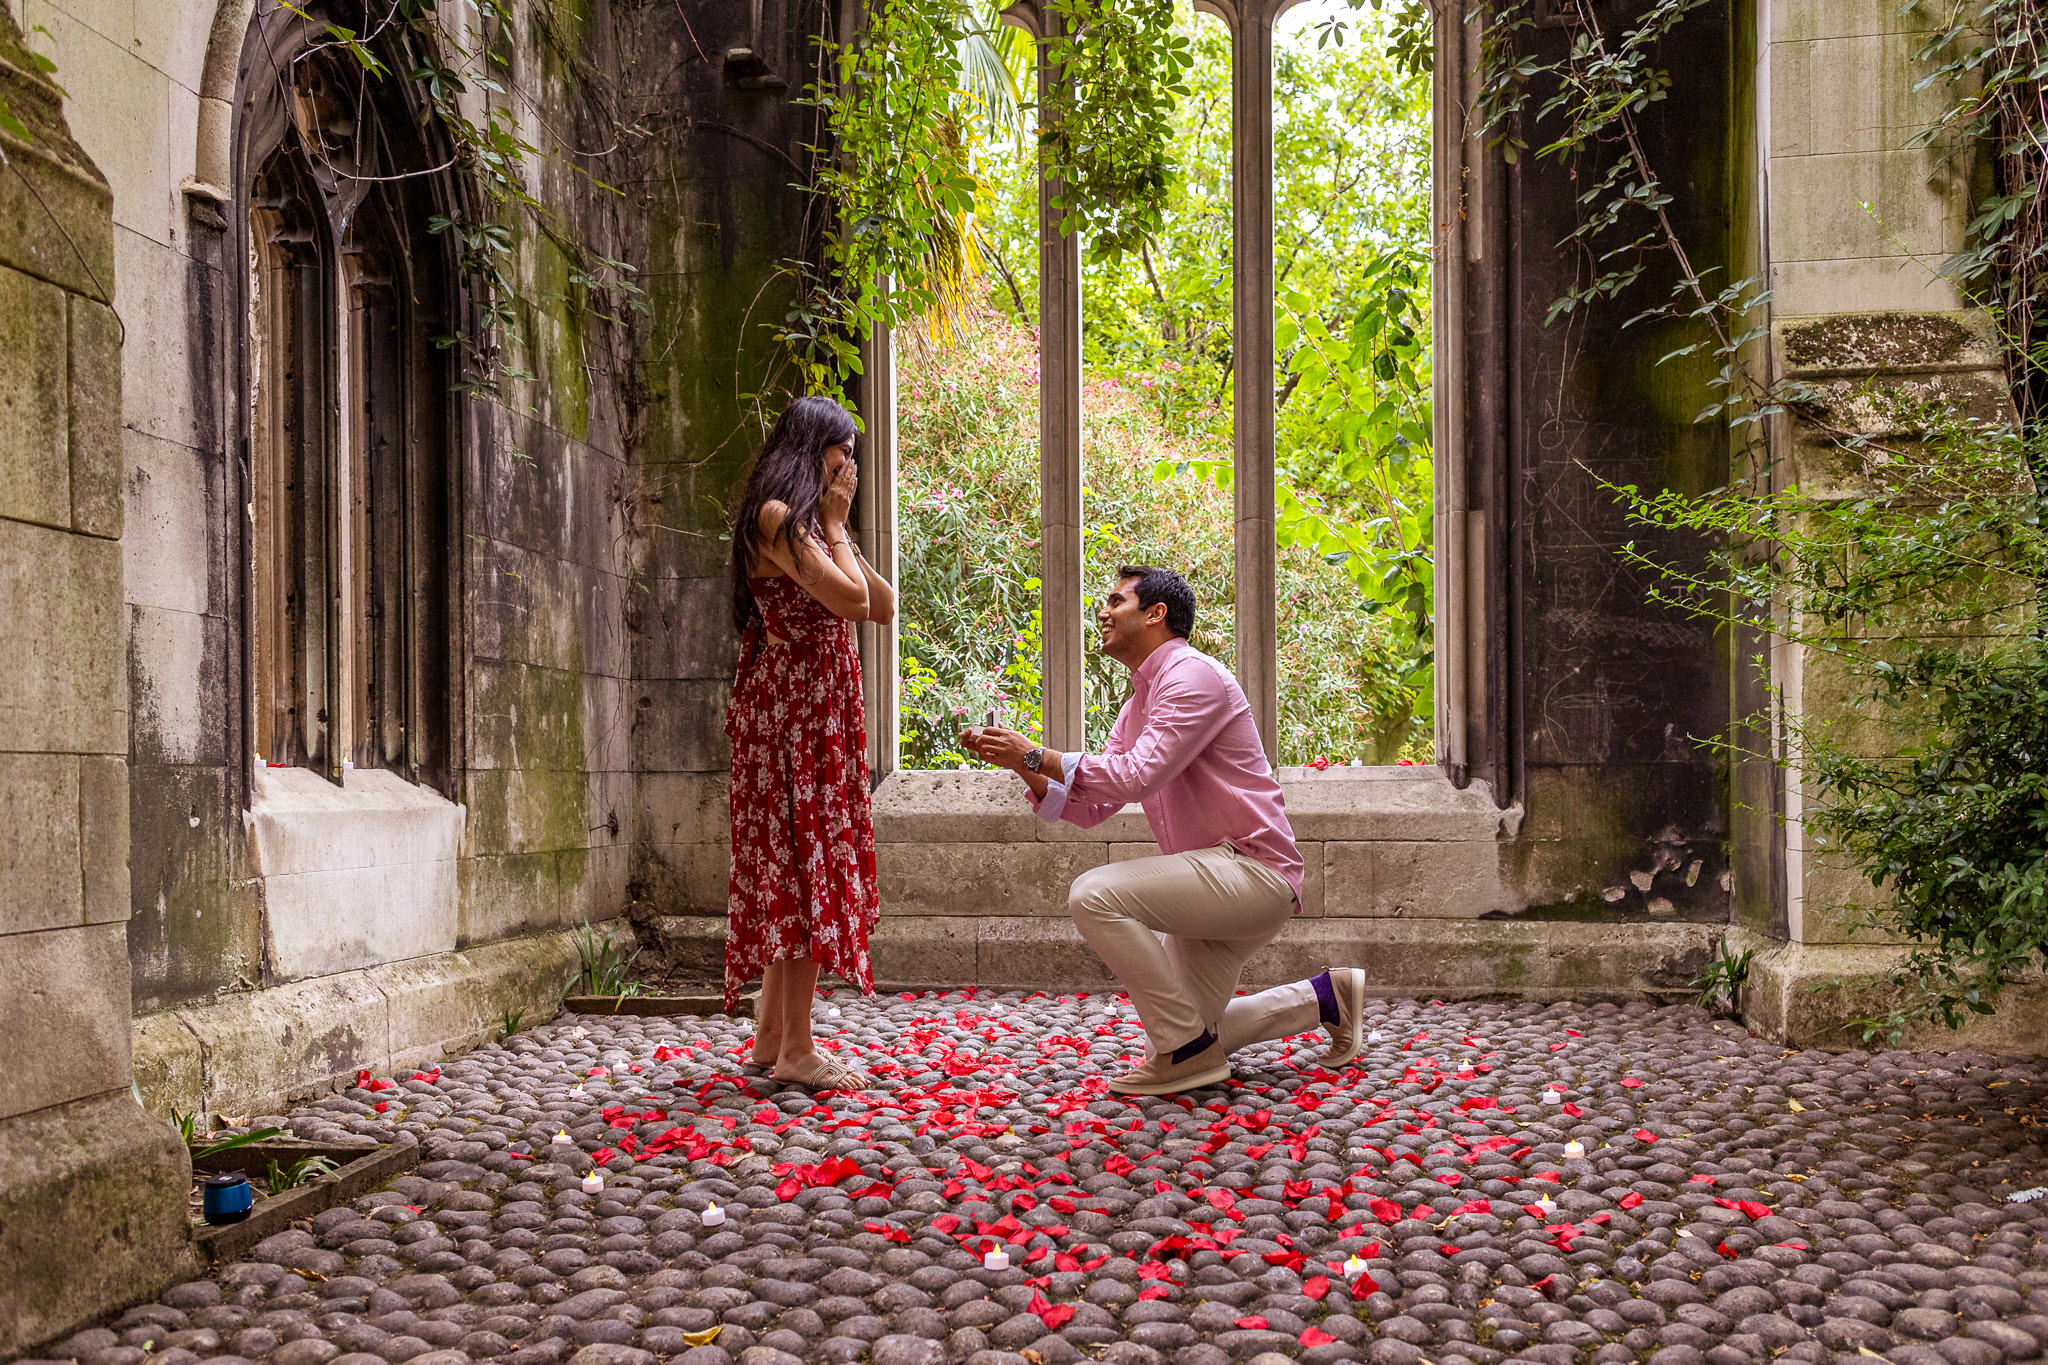 A boyfriend is dropping to one knee for a proposal at St Dunstan in the East Church Garden